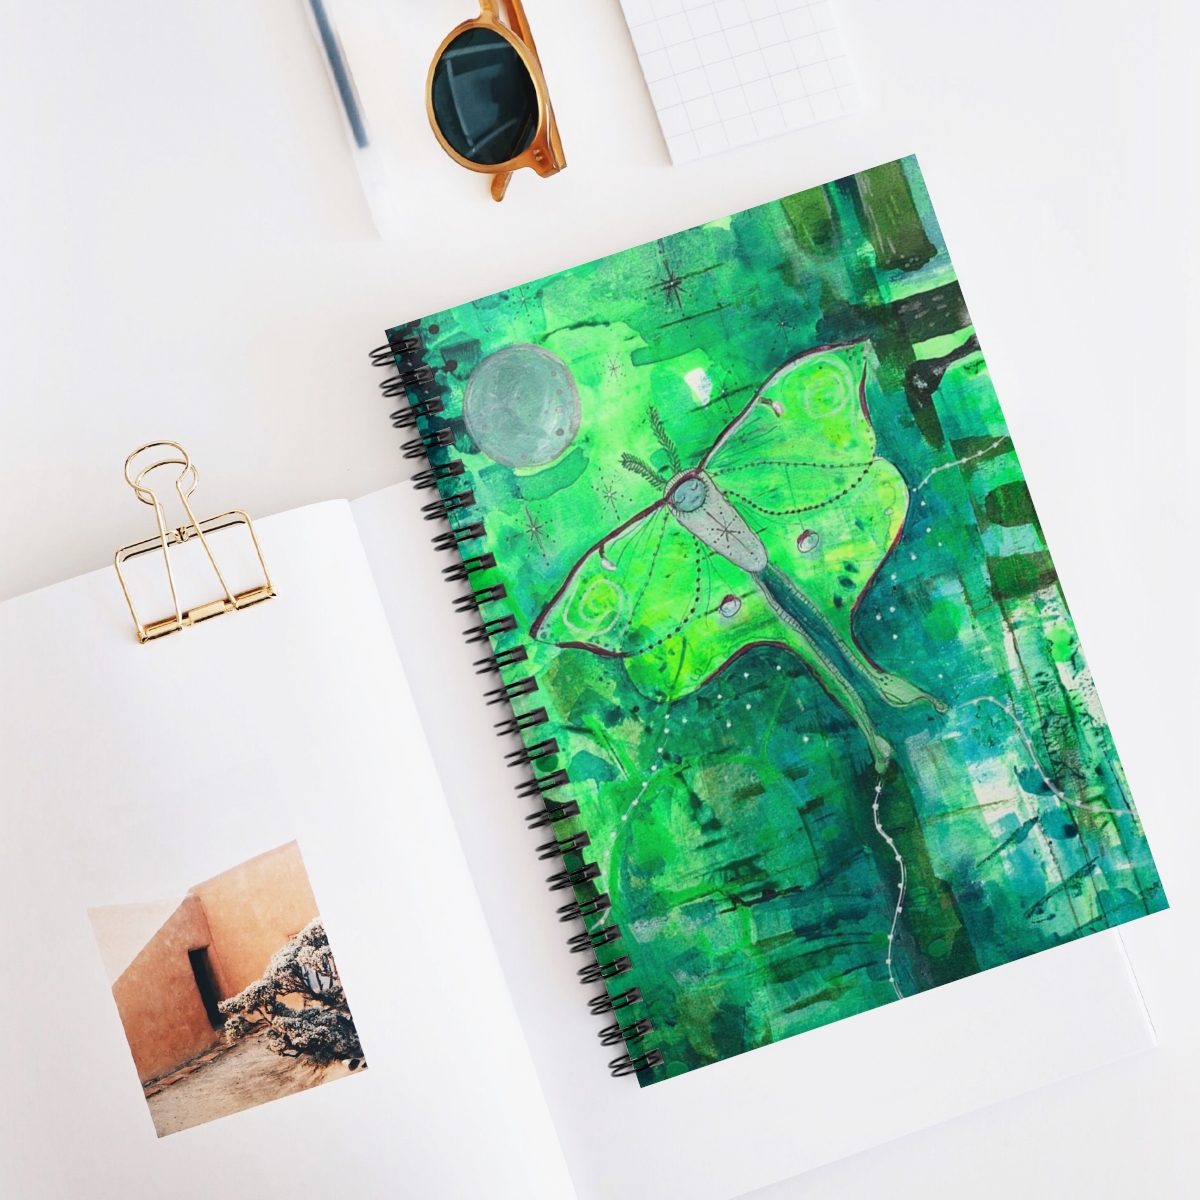 Special luna moth journal in context. Luna moth is a whimsical painting. The moth flies against a background of striking greens towards the moon.